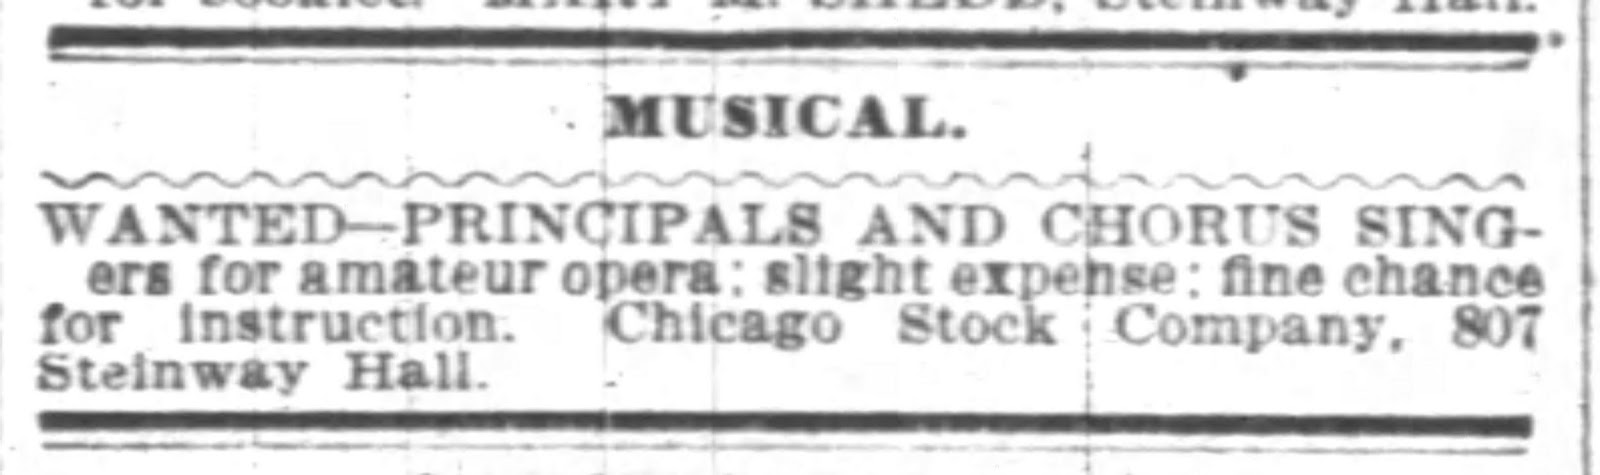 Chicago_Tribune_Thu__Apr_18__1901_ Ad For chicago Stock Company.jpg